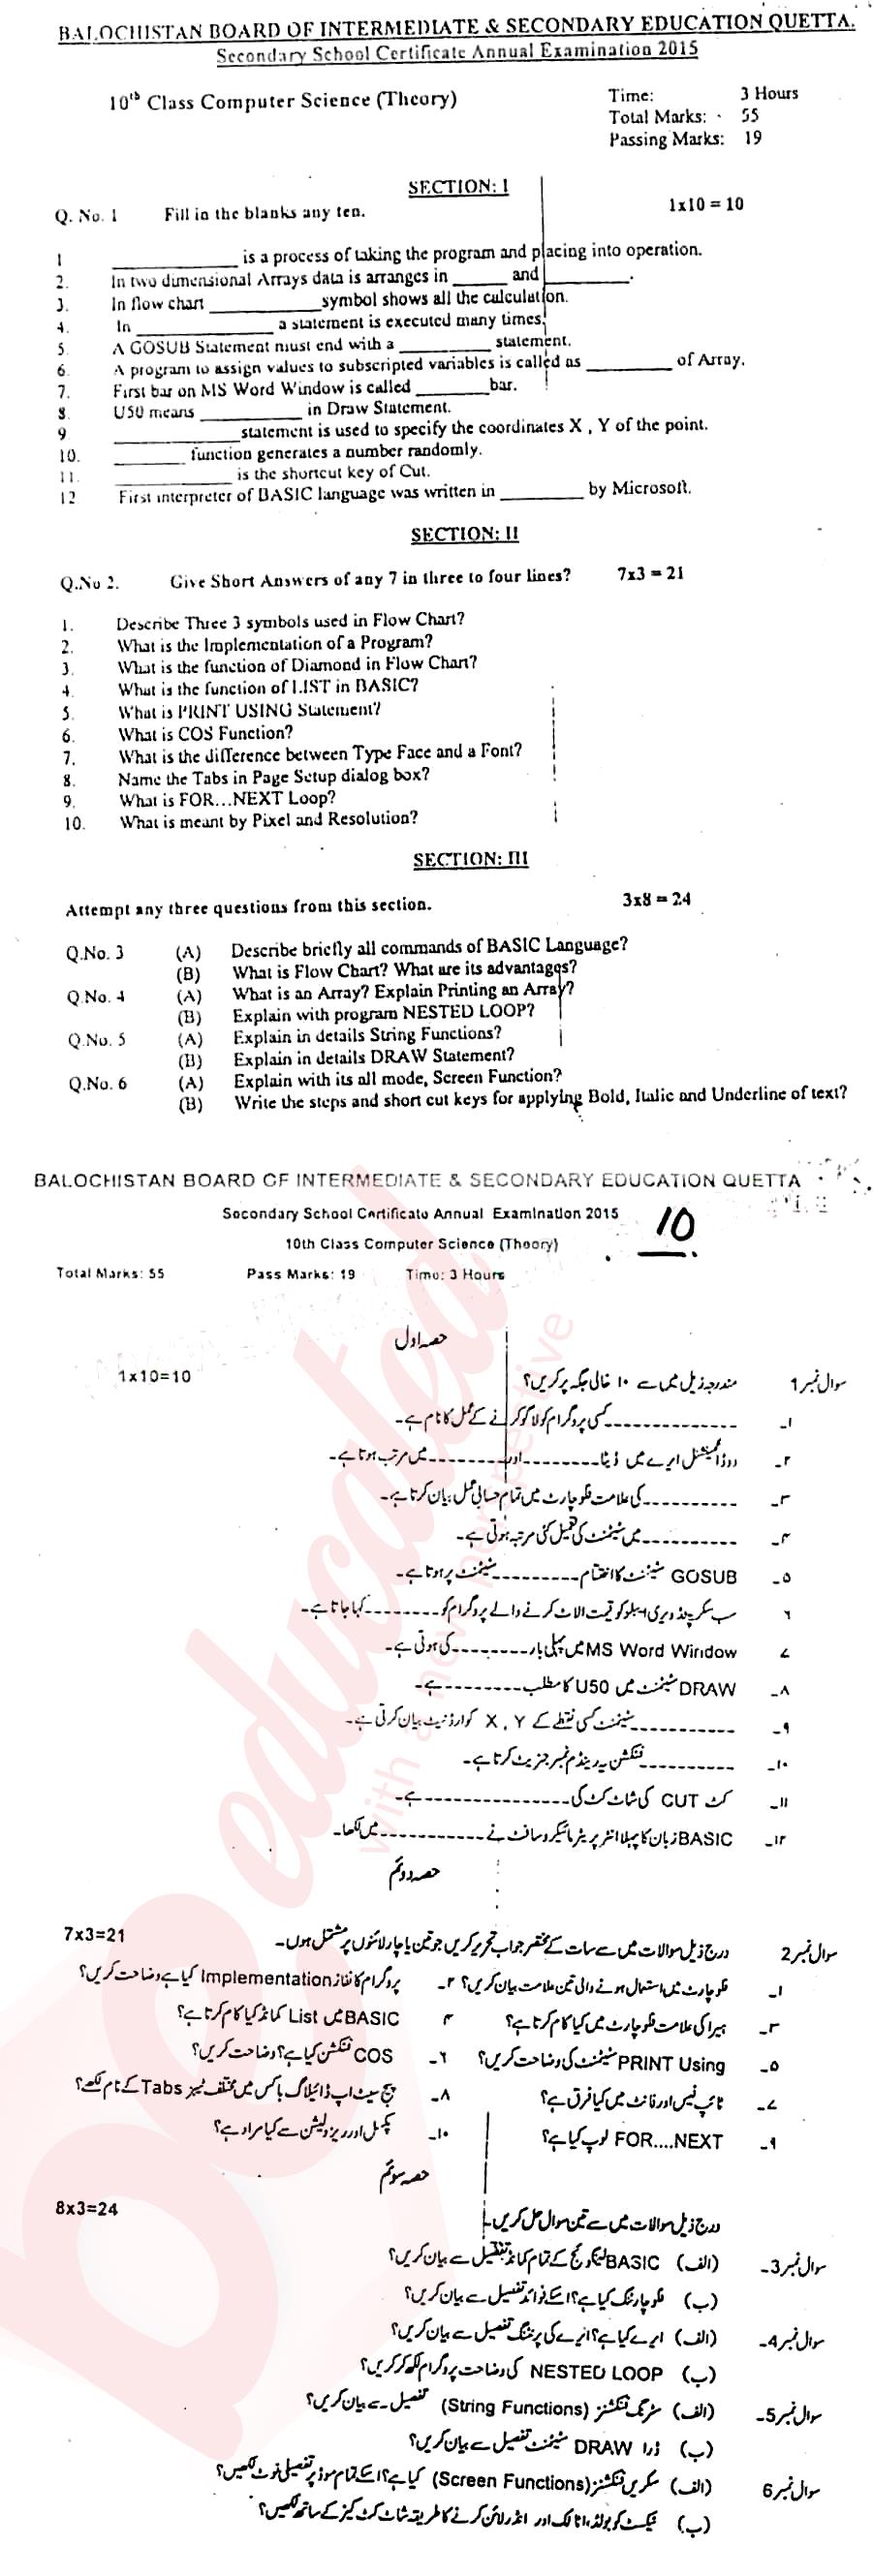 Computer Science 10th English Medium Past Paper Group 1 BISE Quetta 2015